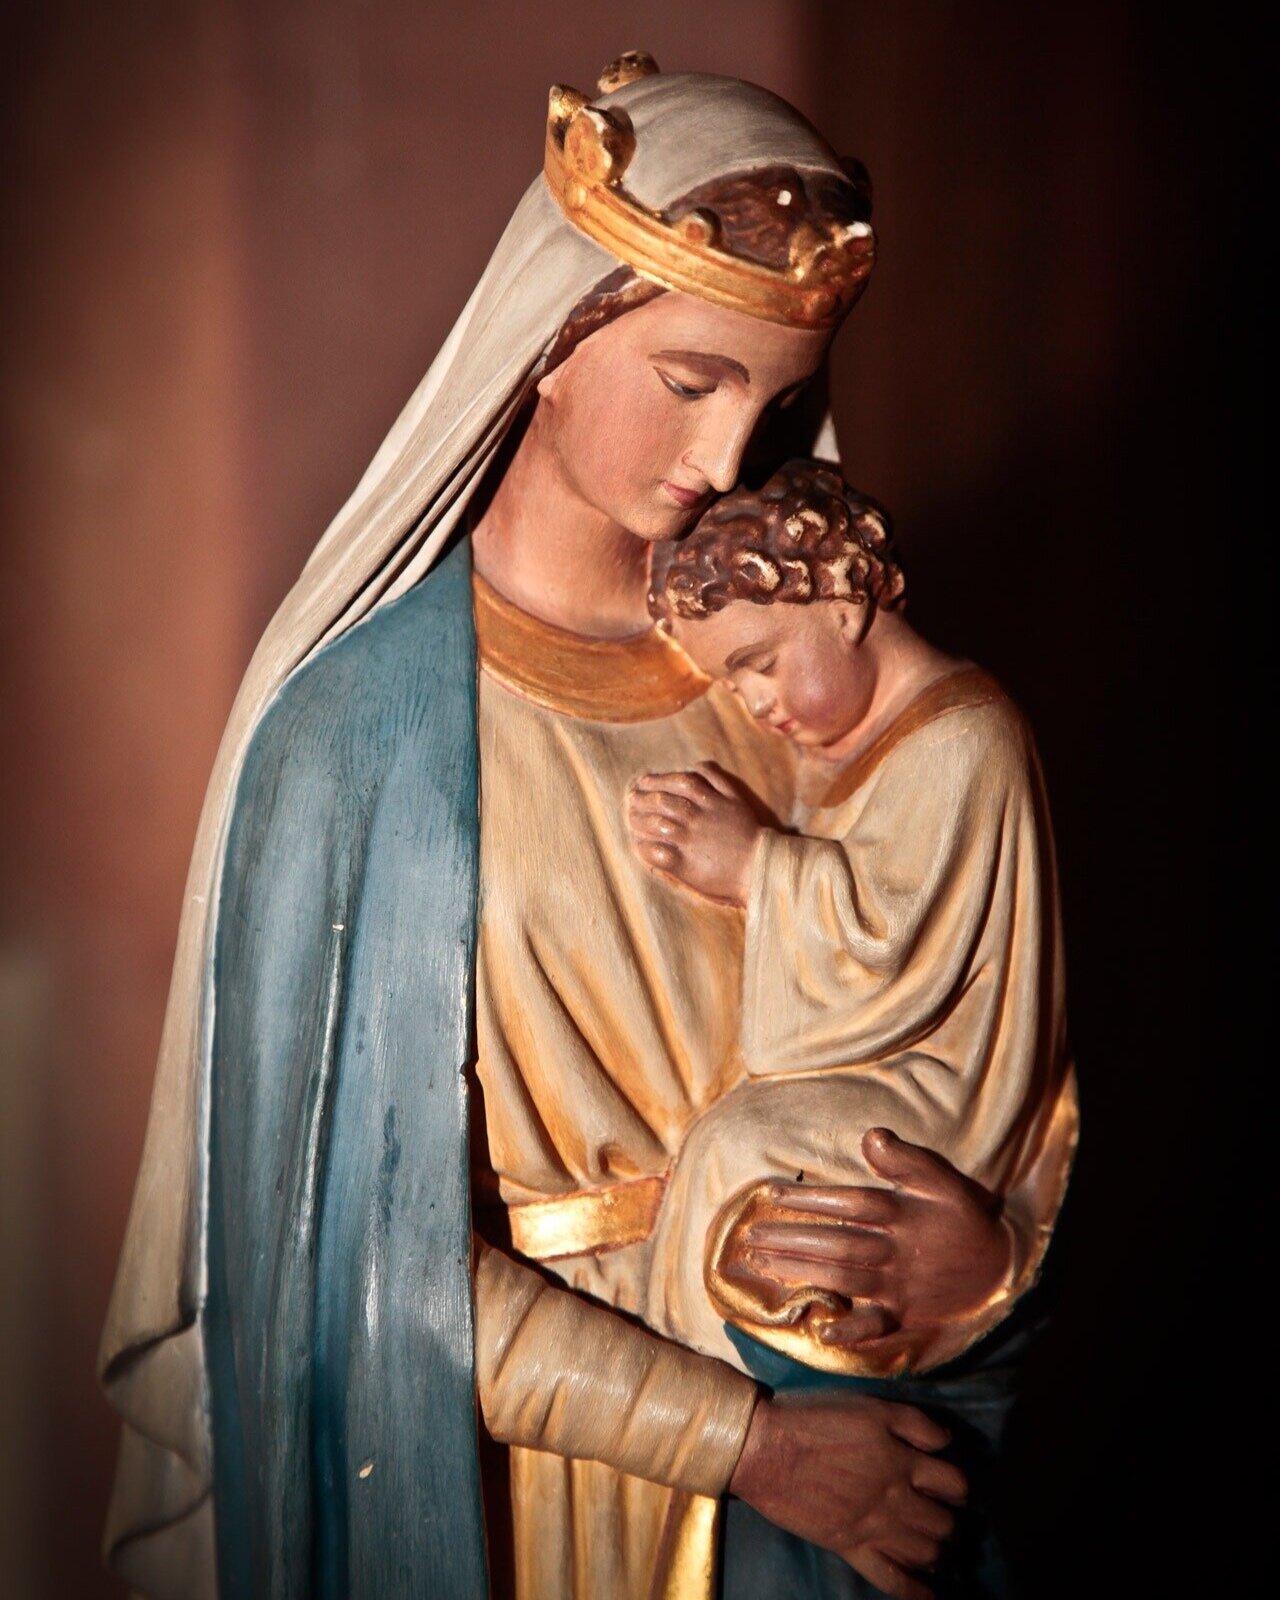 Statue of Mary holding Jesus